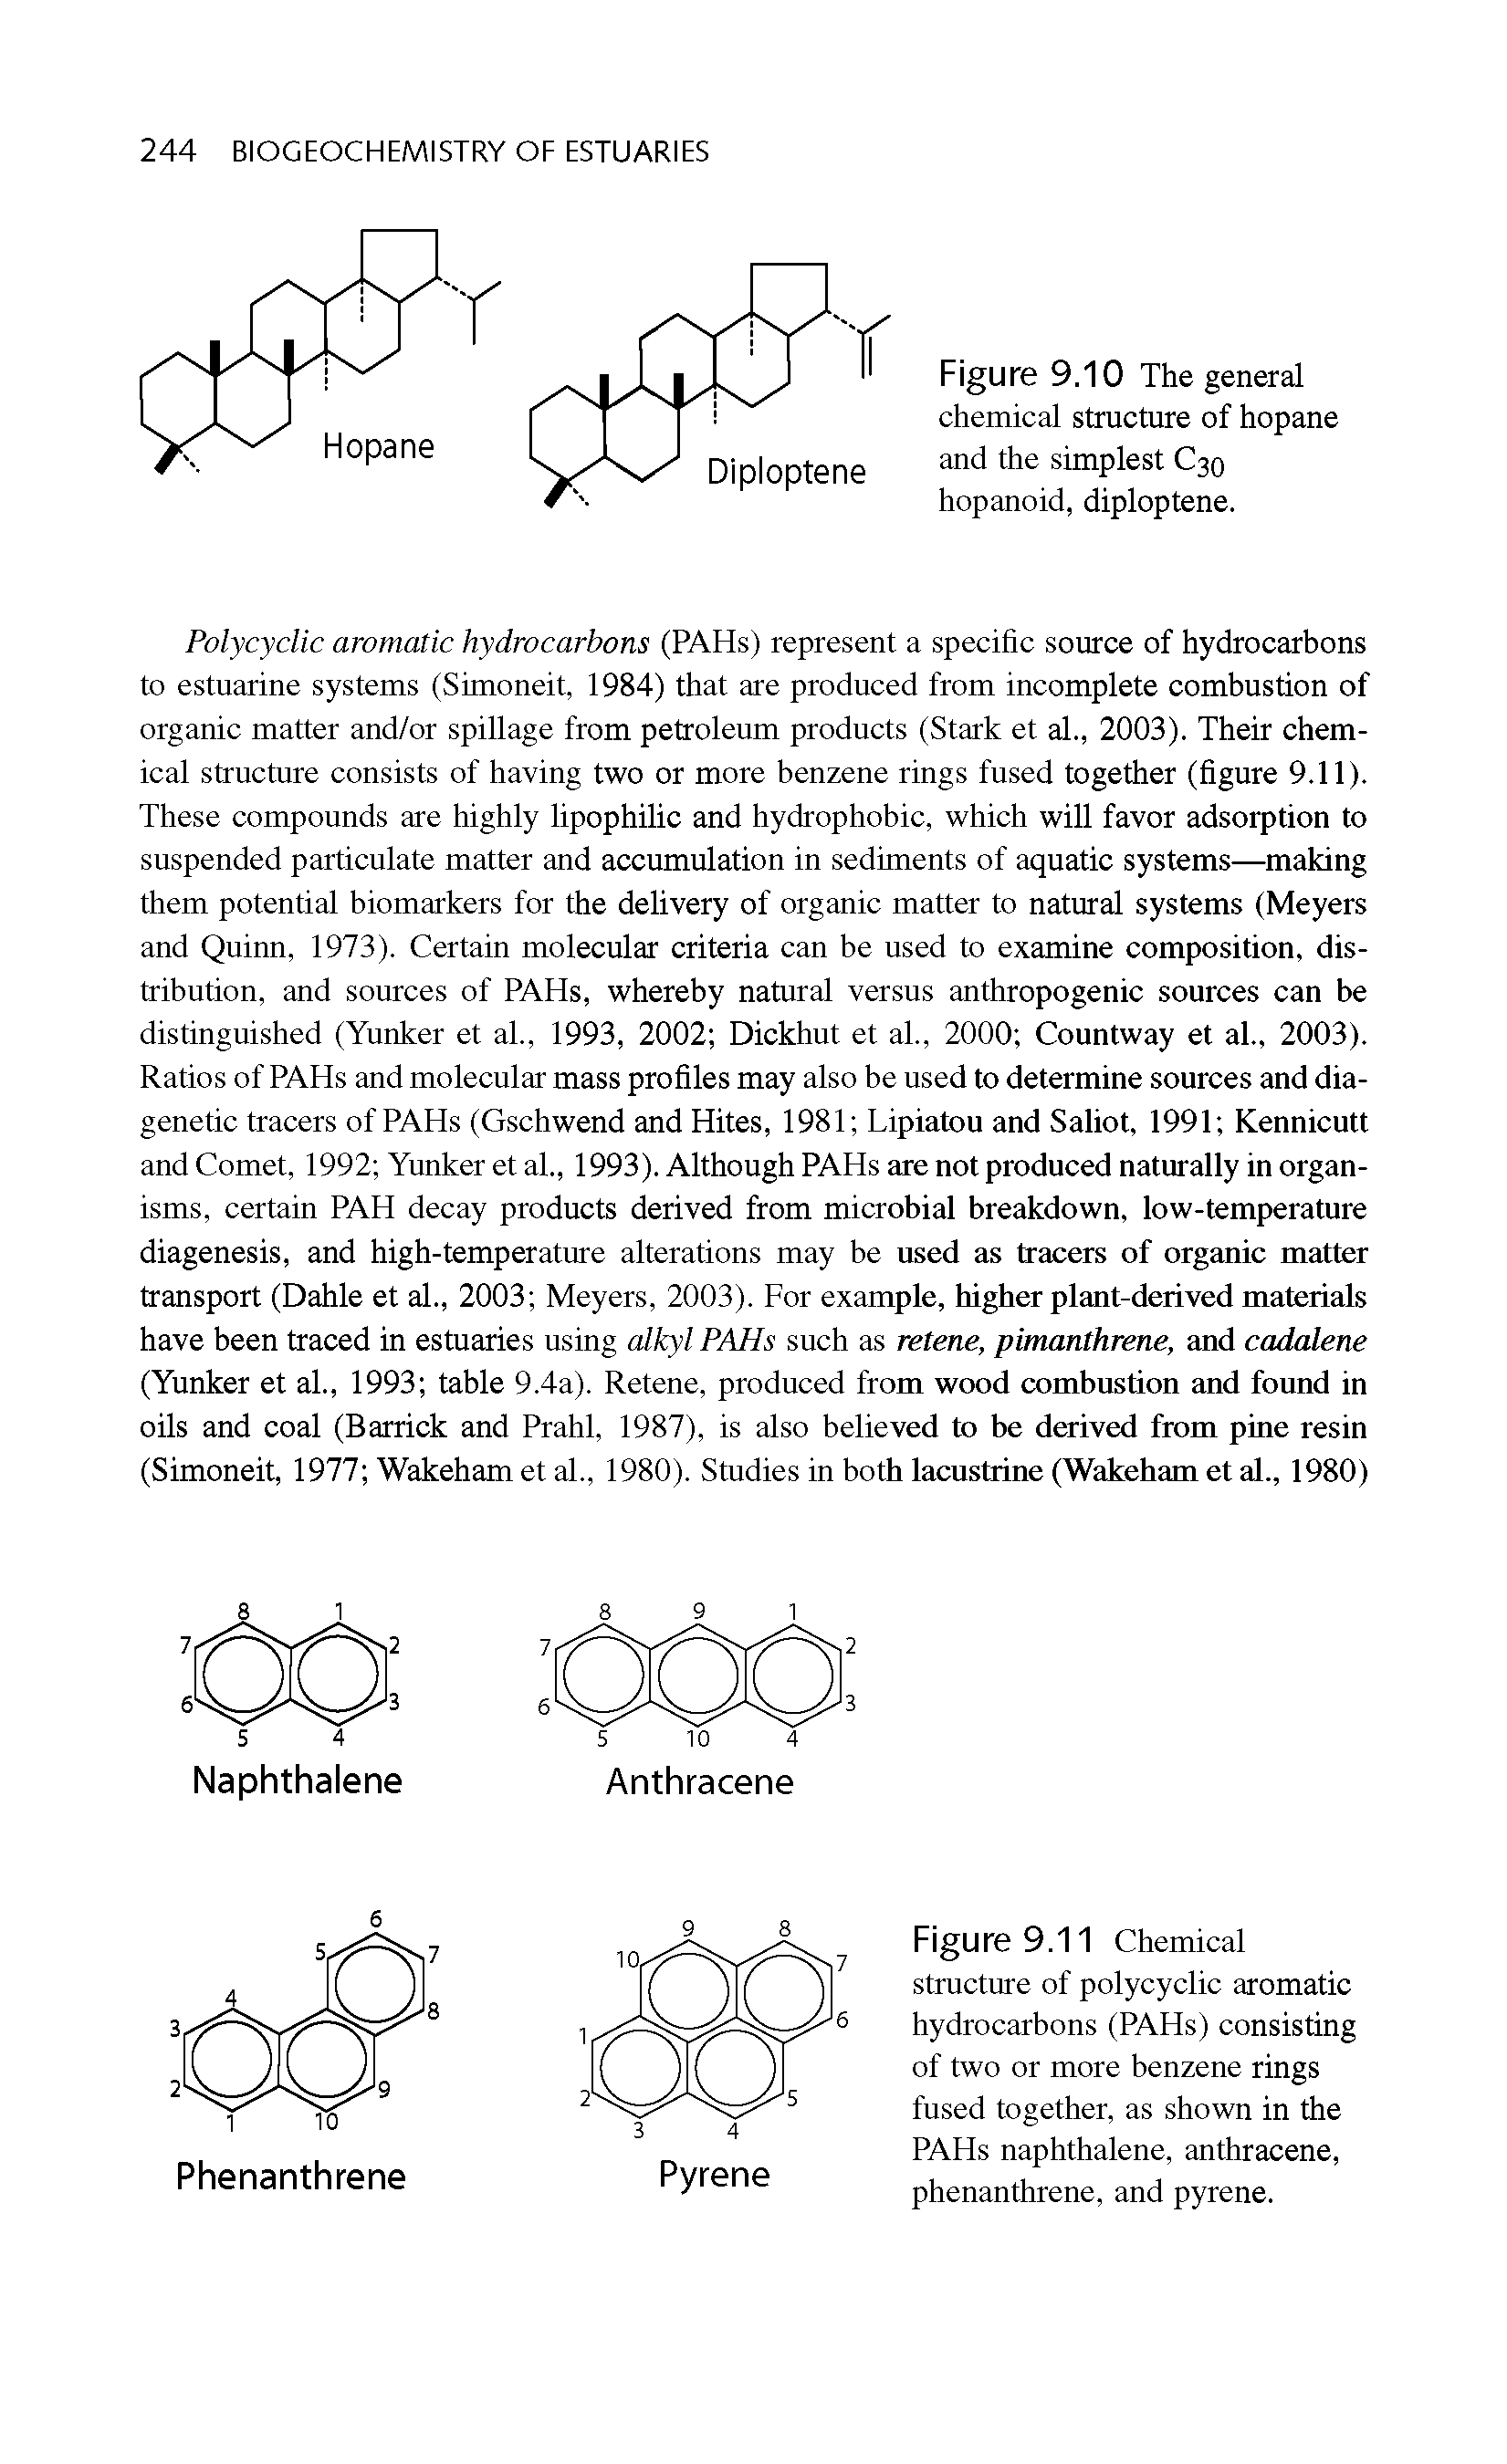 Figure 9.11 Chemical structure of polycyclic aromatic hydrocarbons (PAHs) consisting of two or more benzene rings fused together, as shown in the PAHs naphthalene, anthracene, phenanthrene, and pyrene.